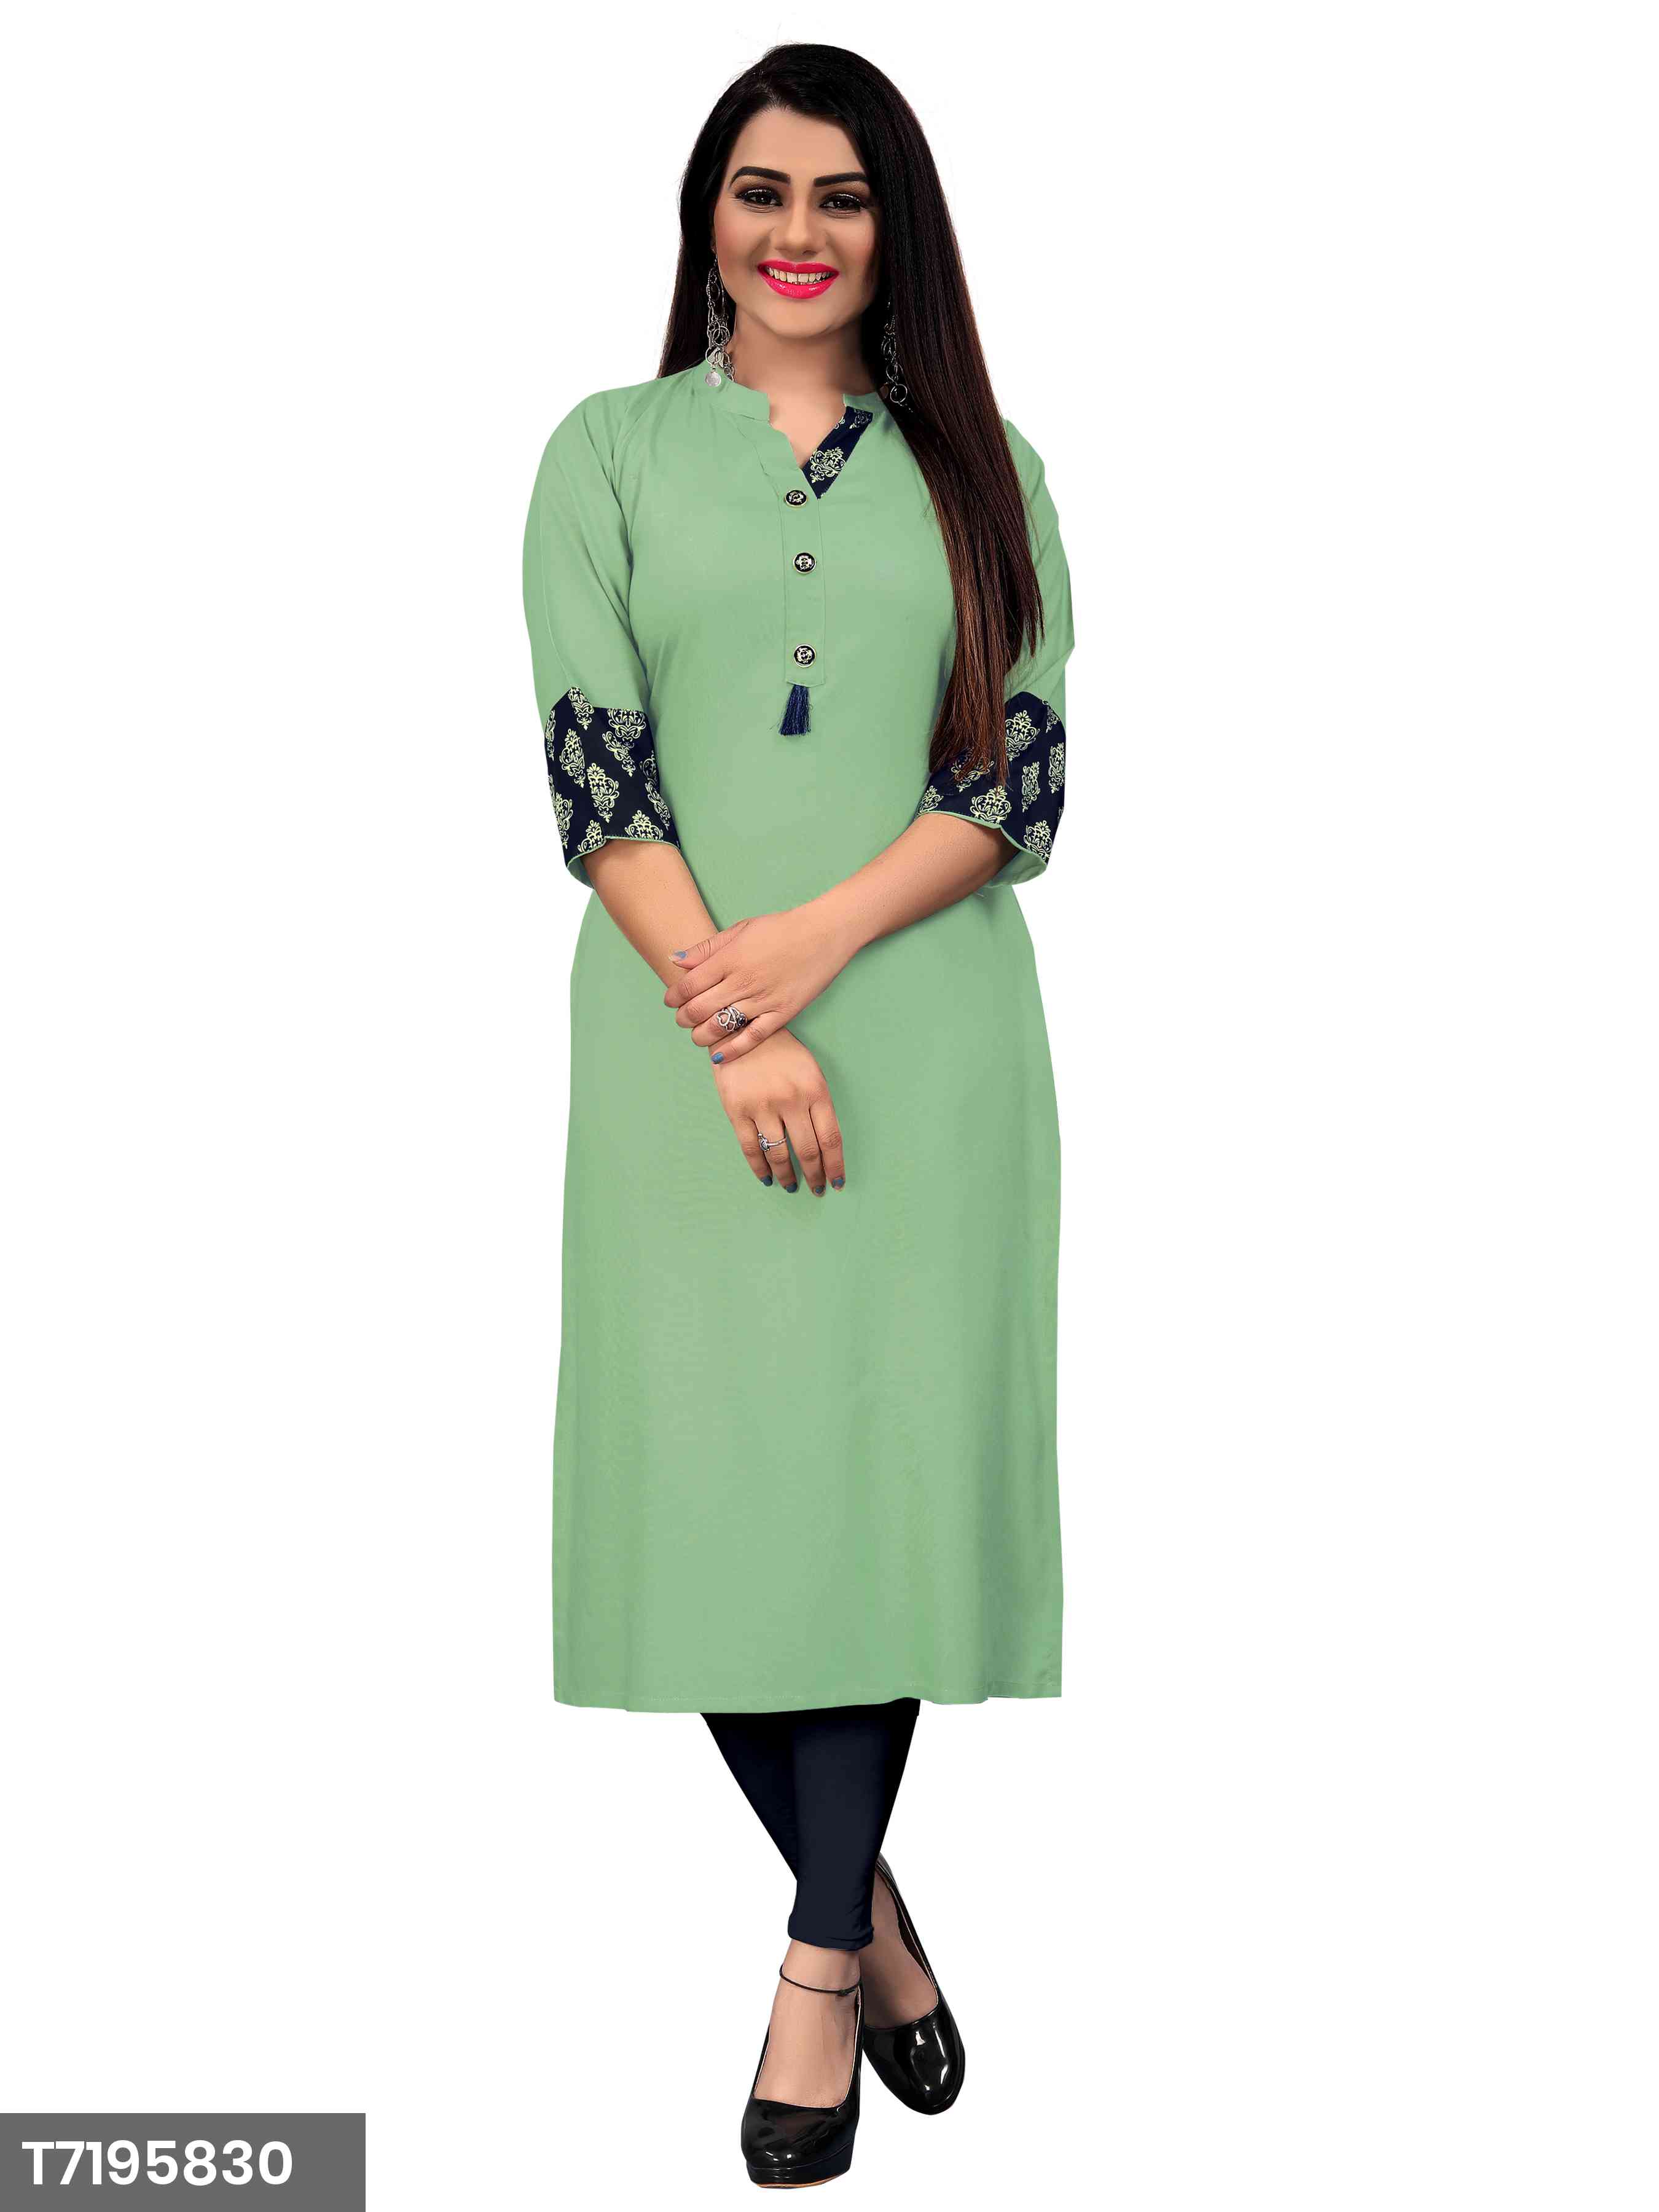 New Plain Green Color Rayon Kurti For Women's